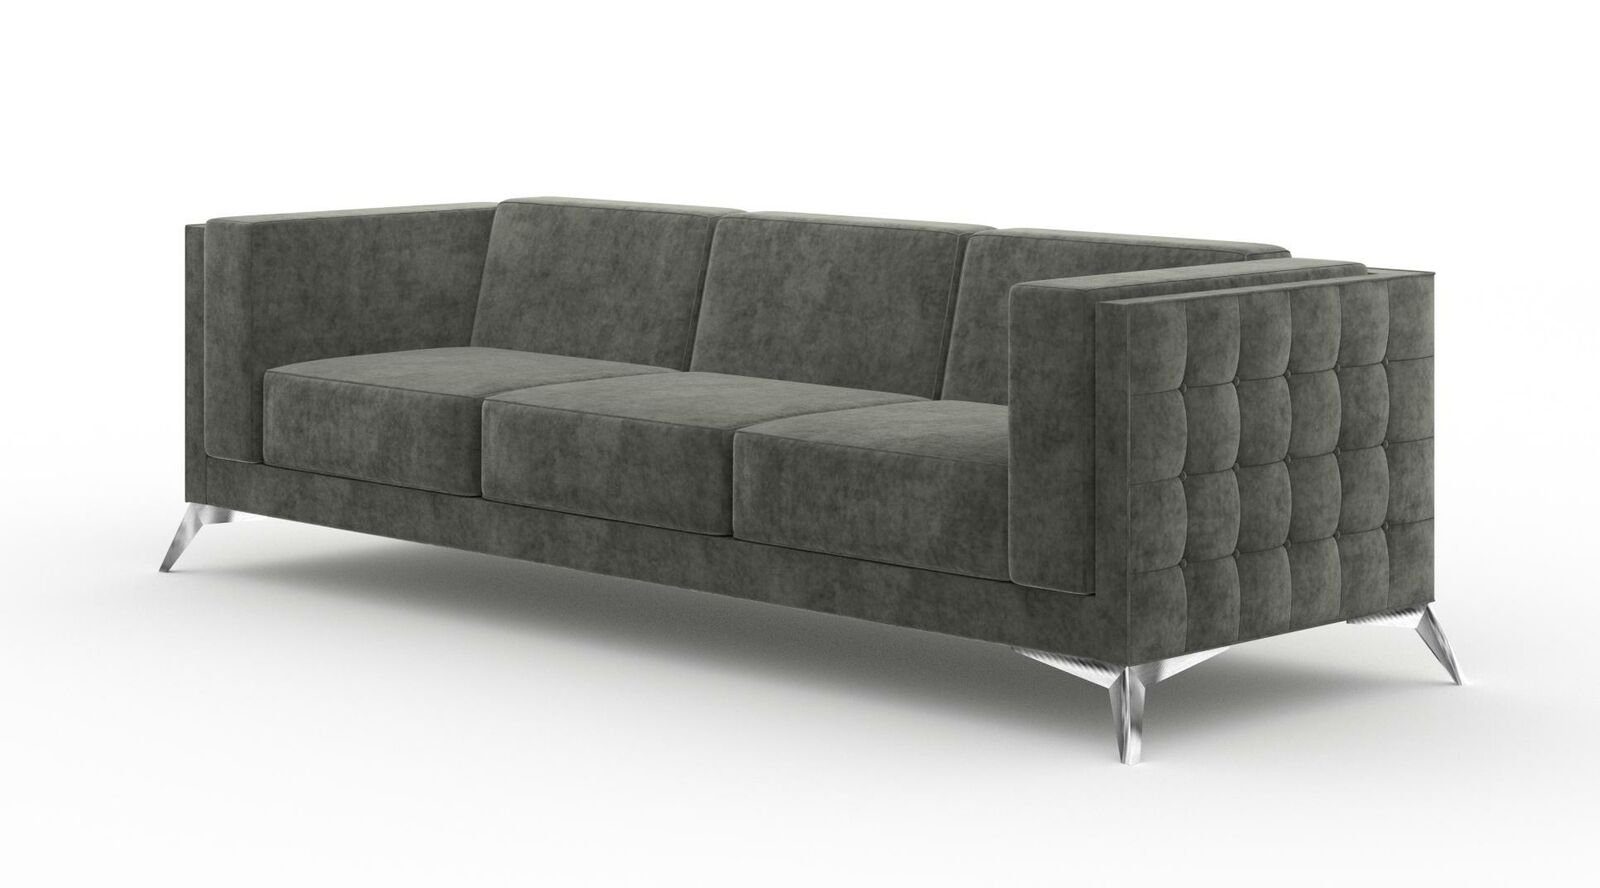 JVmoebel Sofa Design Sofa Couch Sitzer Couch Dreisitzer Sofas Dreisitzer 3 Neu, Polster Sofas Chesterfield Design 3 Sitzer Polster Neu Sofa